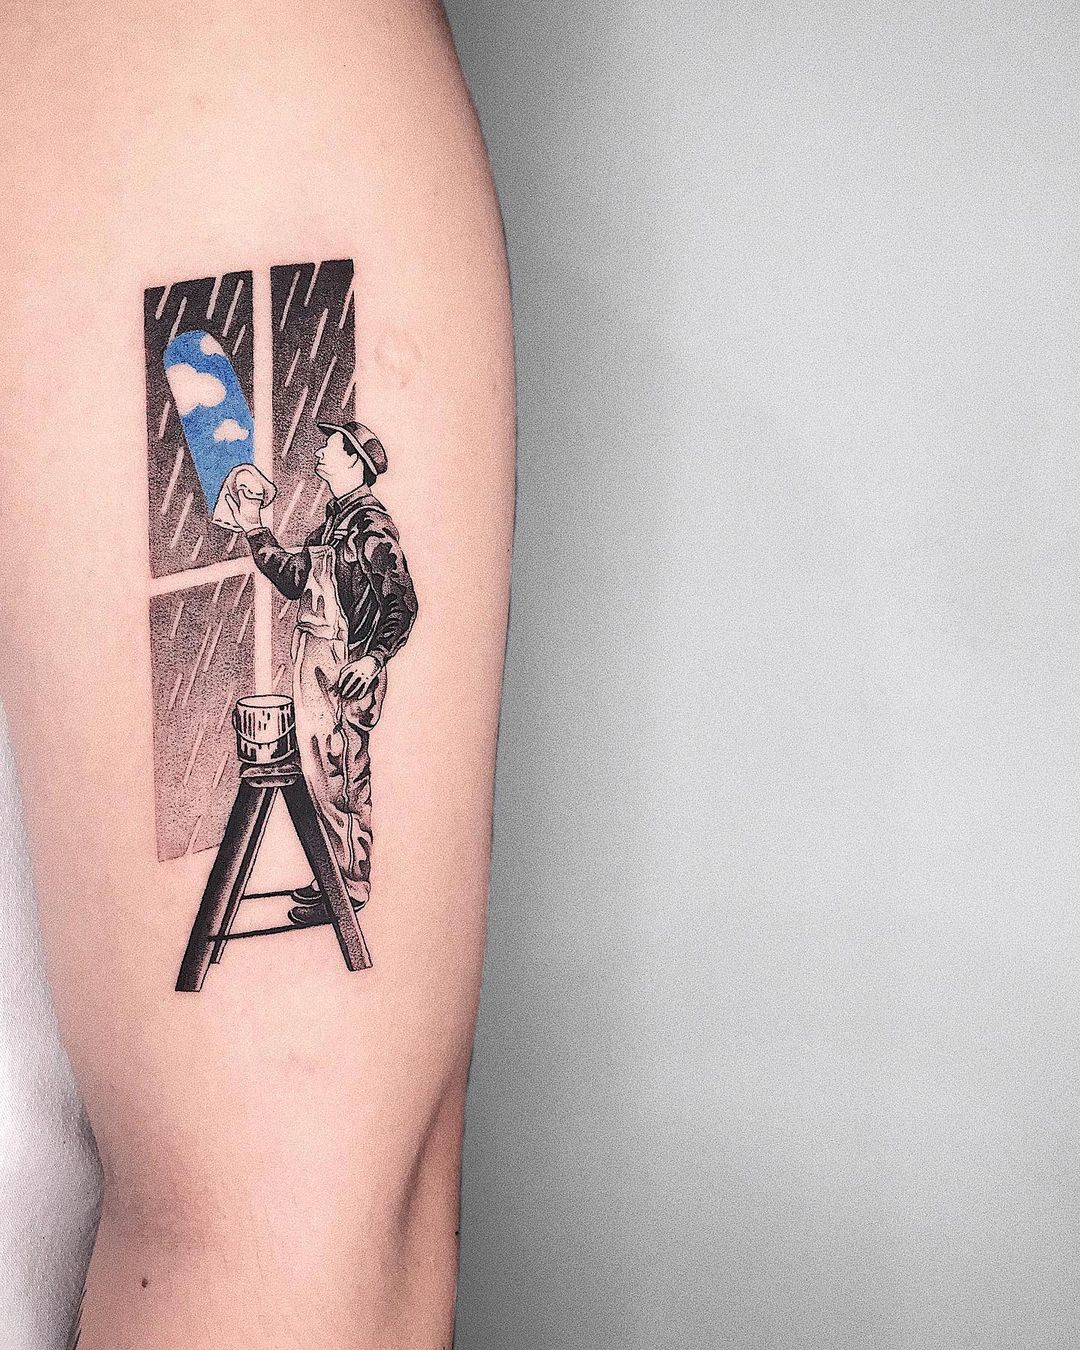 25 Surrealism Tattoos That Will Bend Your Mind